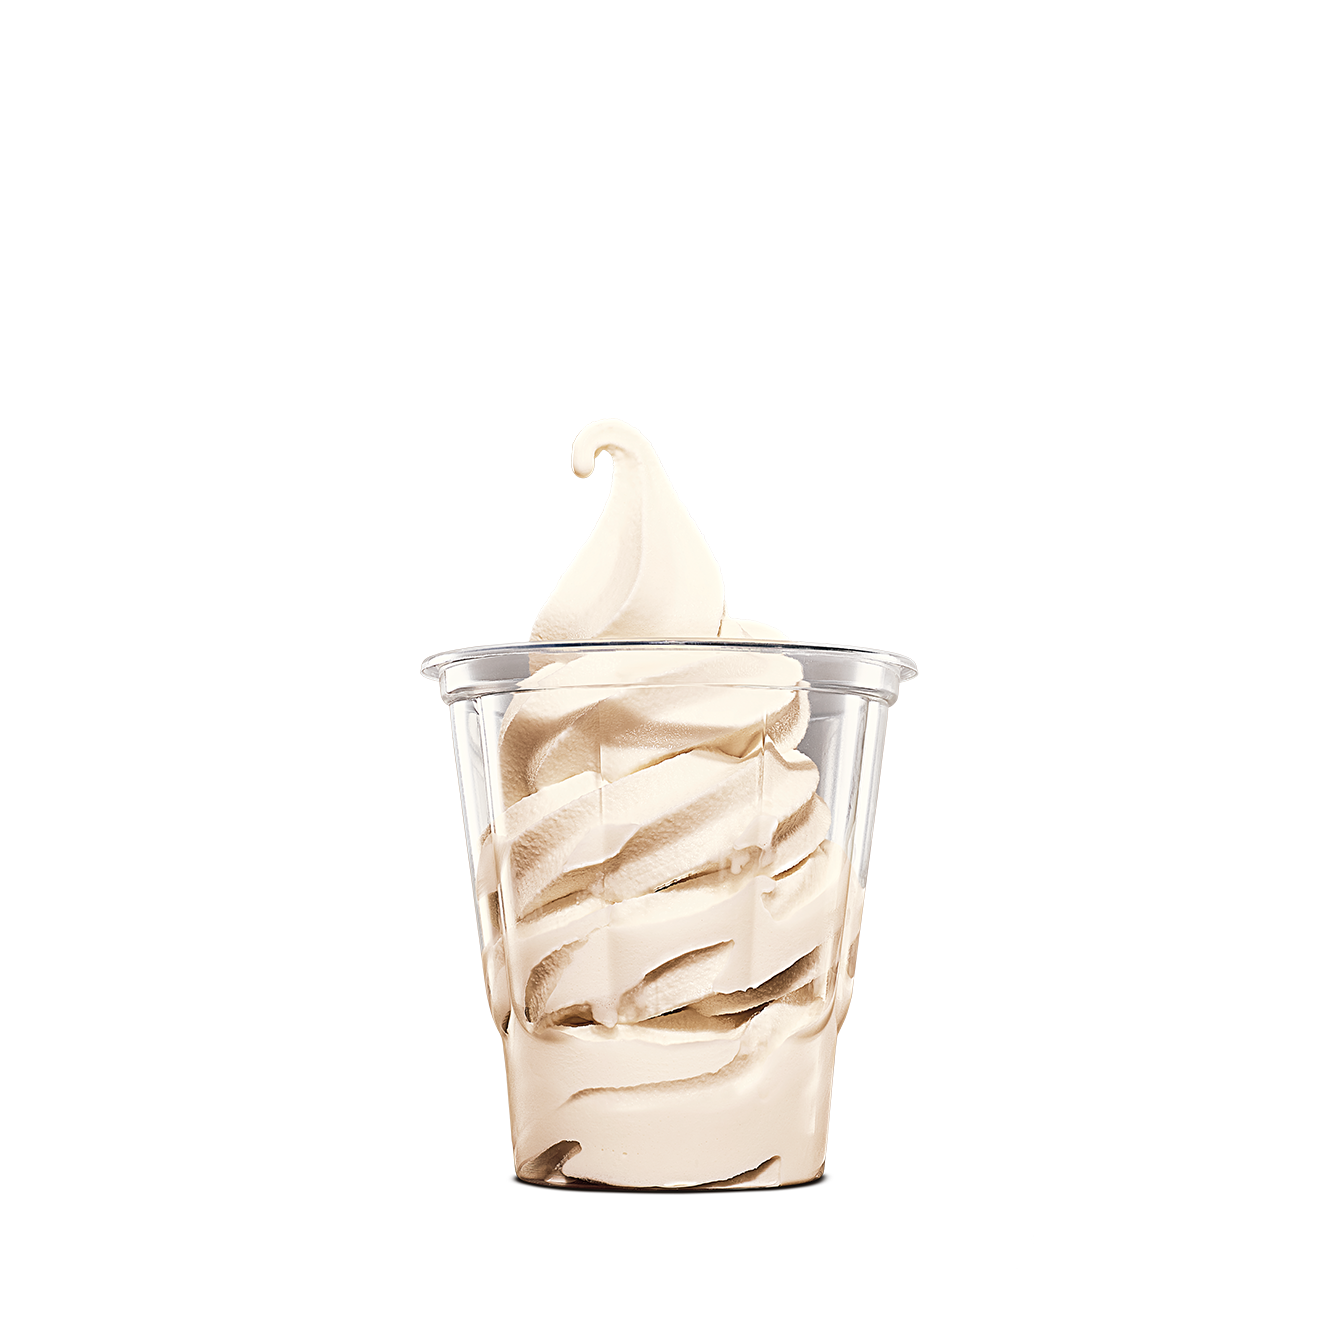 Calories in Burger King Soft Serve Cup